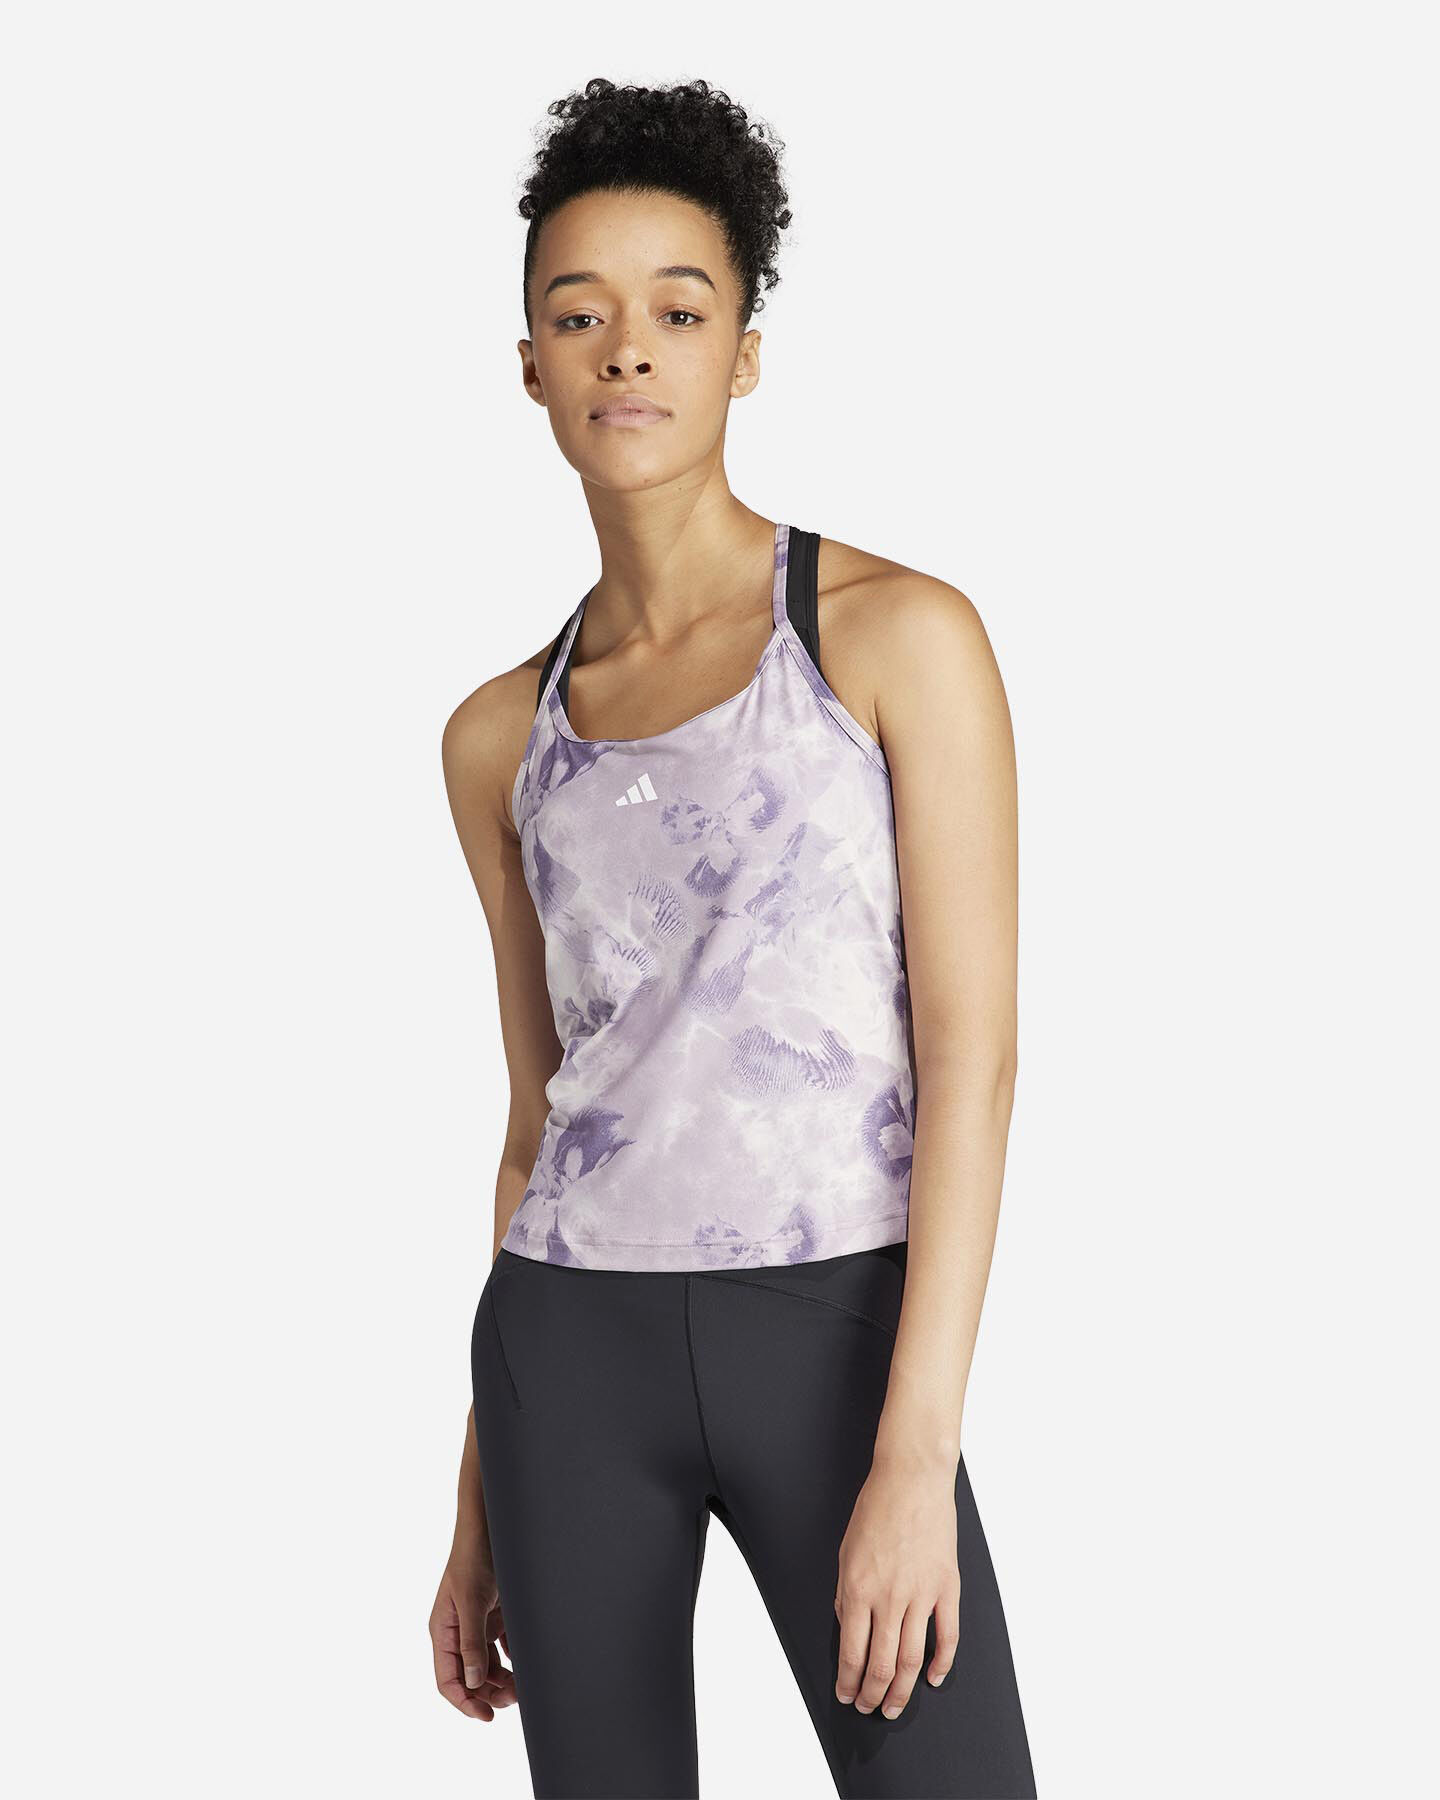  Canotta training ADIDAS ALL OVER FLOWER W S5654484|UNI|XS scatto 1